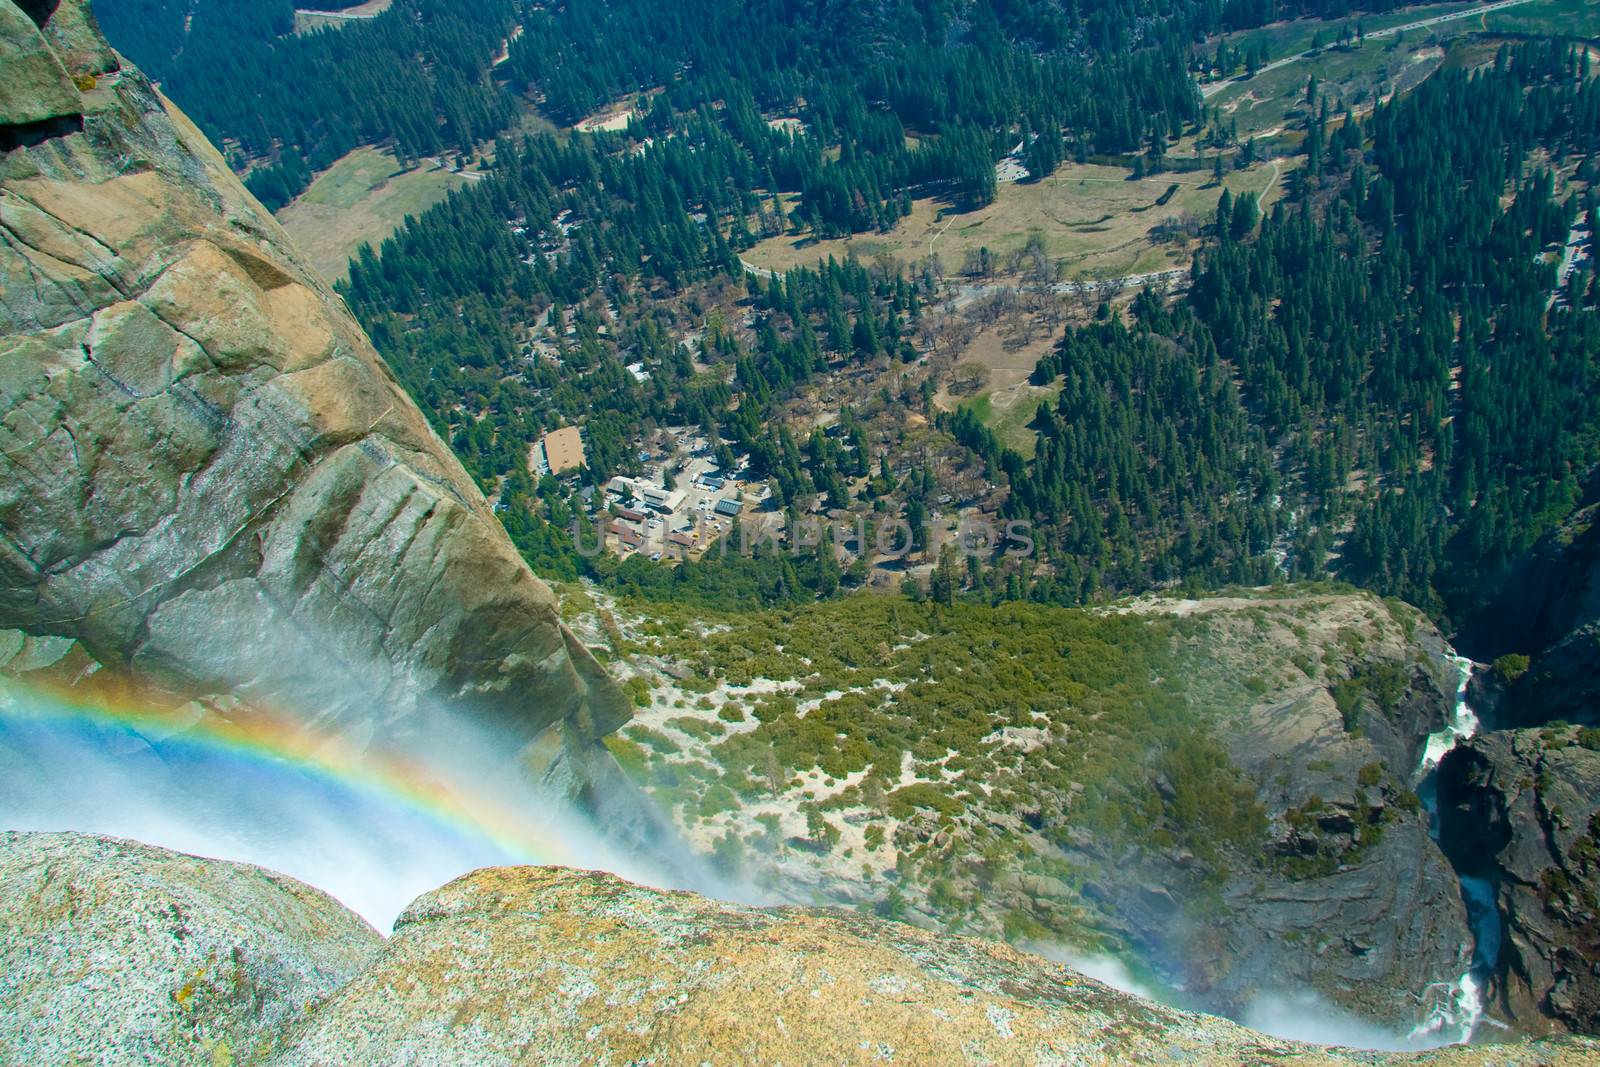 View looking down from top of Yosemite Falls in National Park, California, U.S.A.